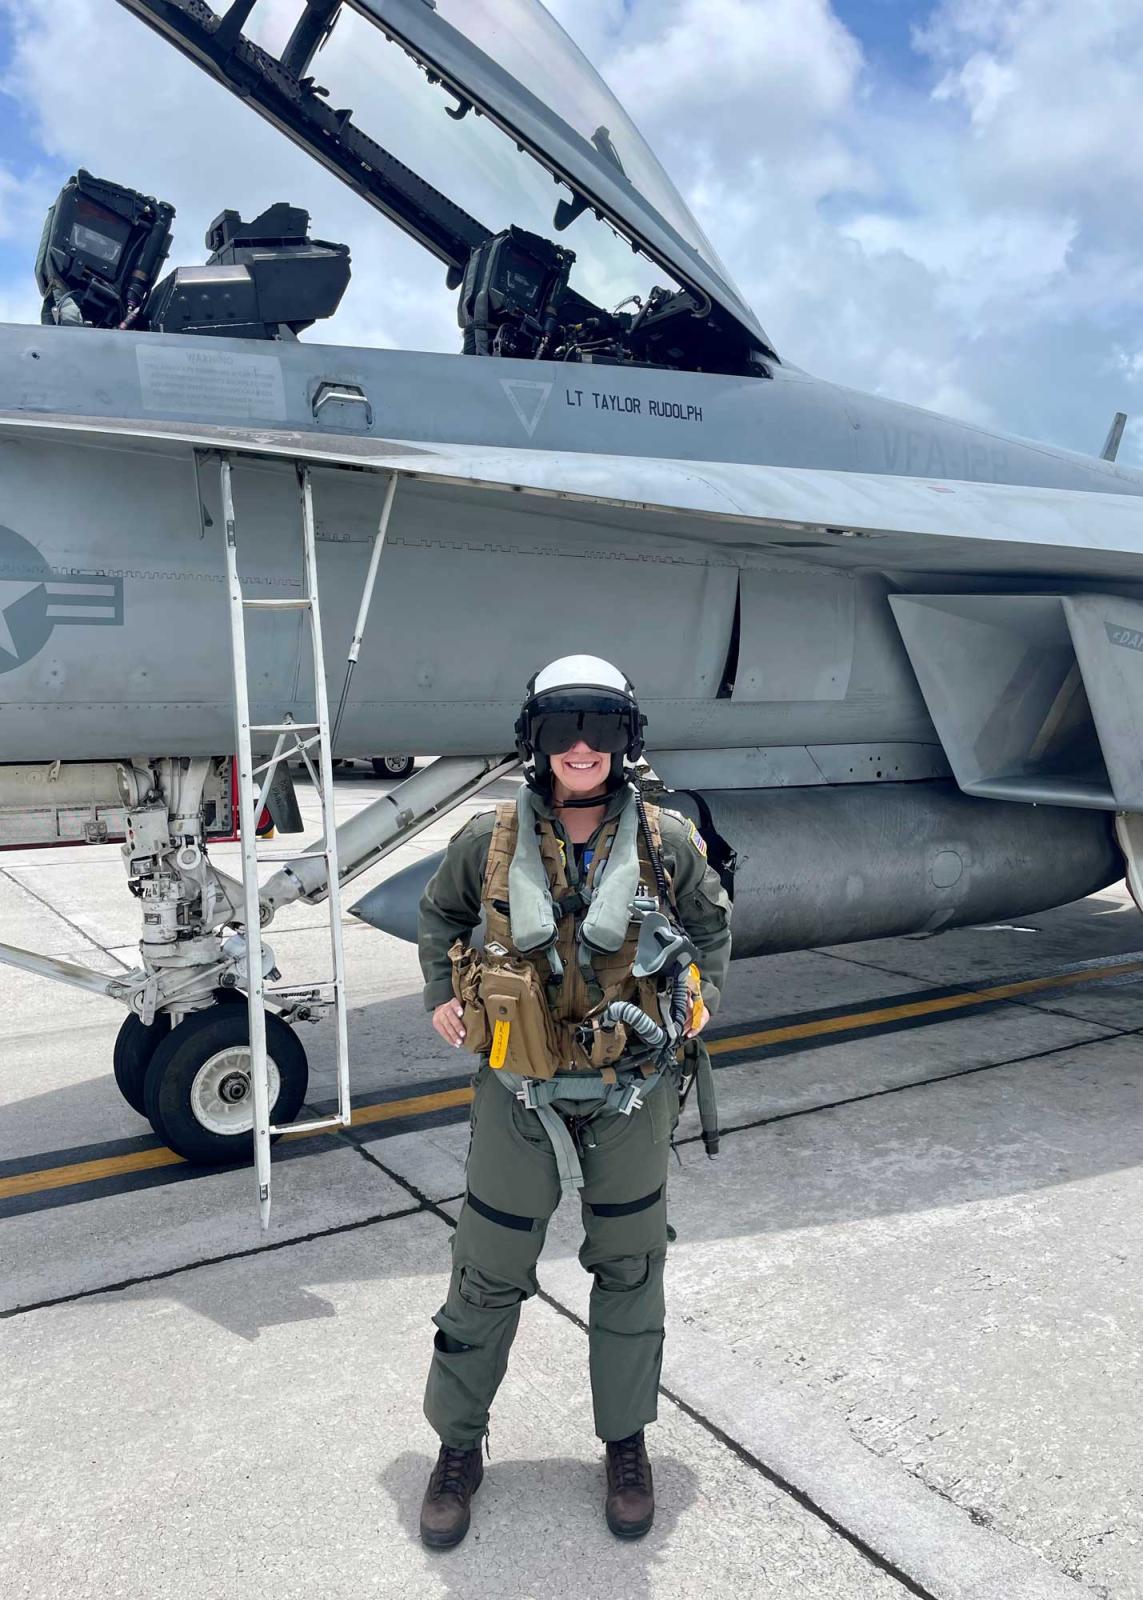 Taylor Rudolph posing in flight suit in front of her jet